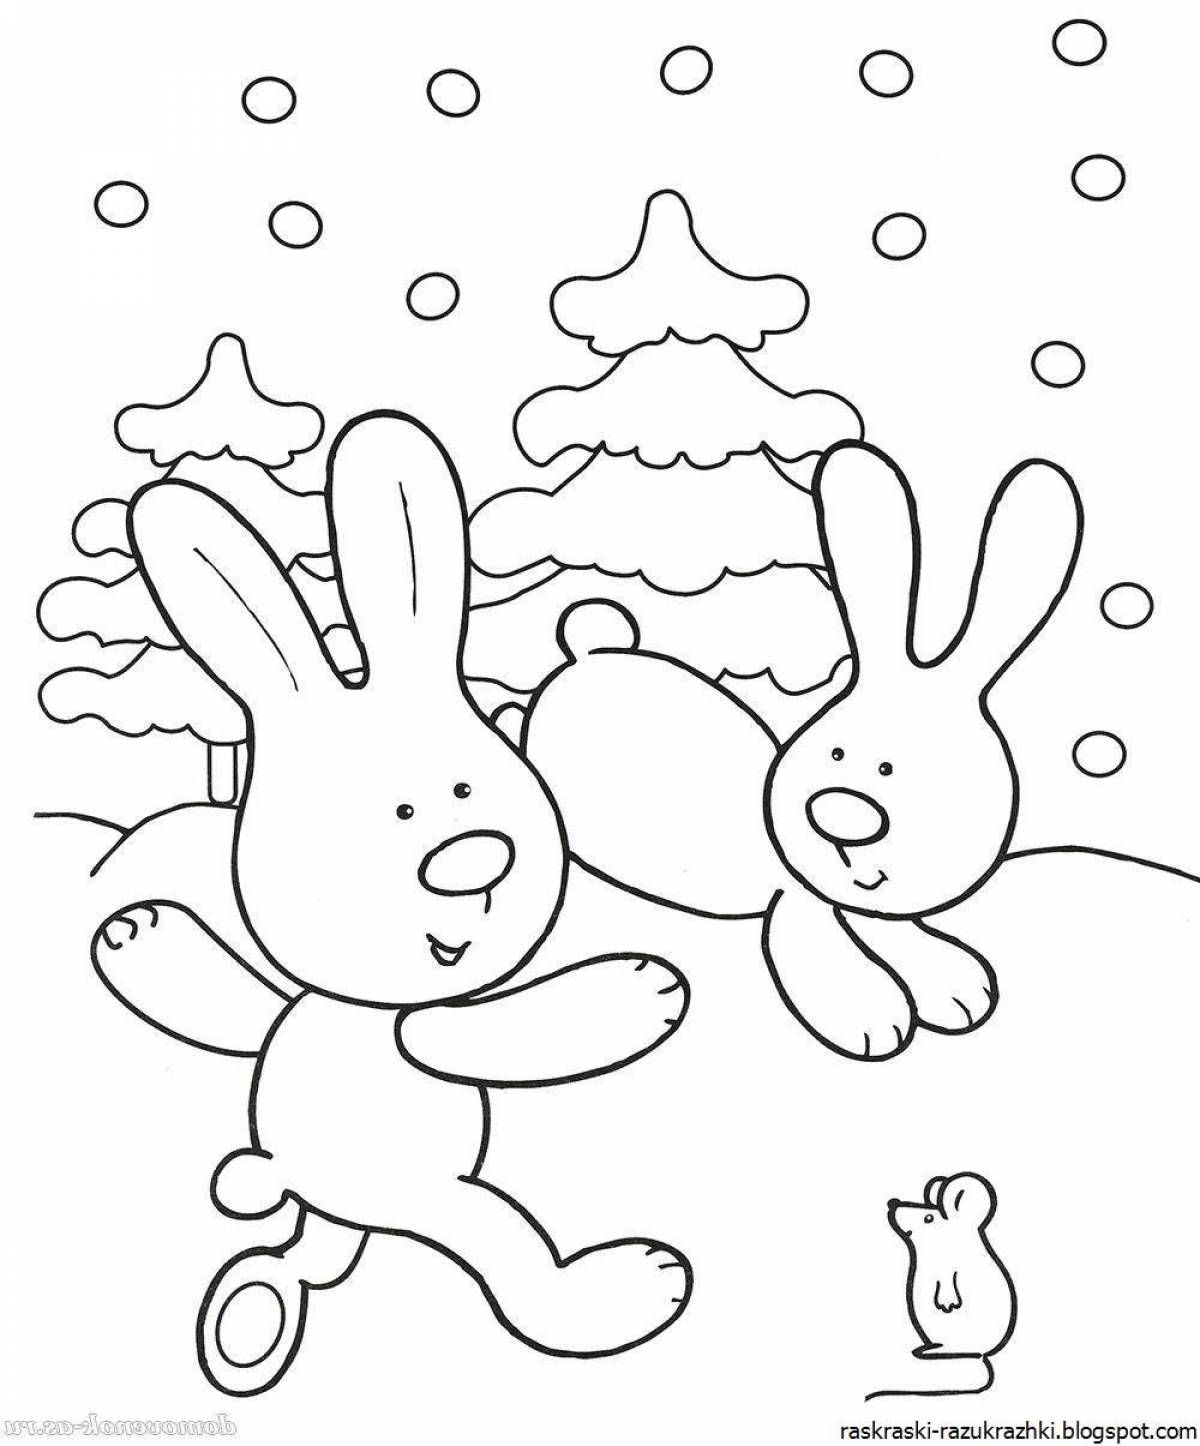 Serene winter coloring book for 4-5 year olds